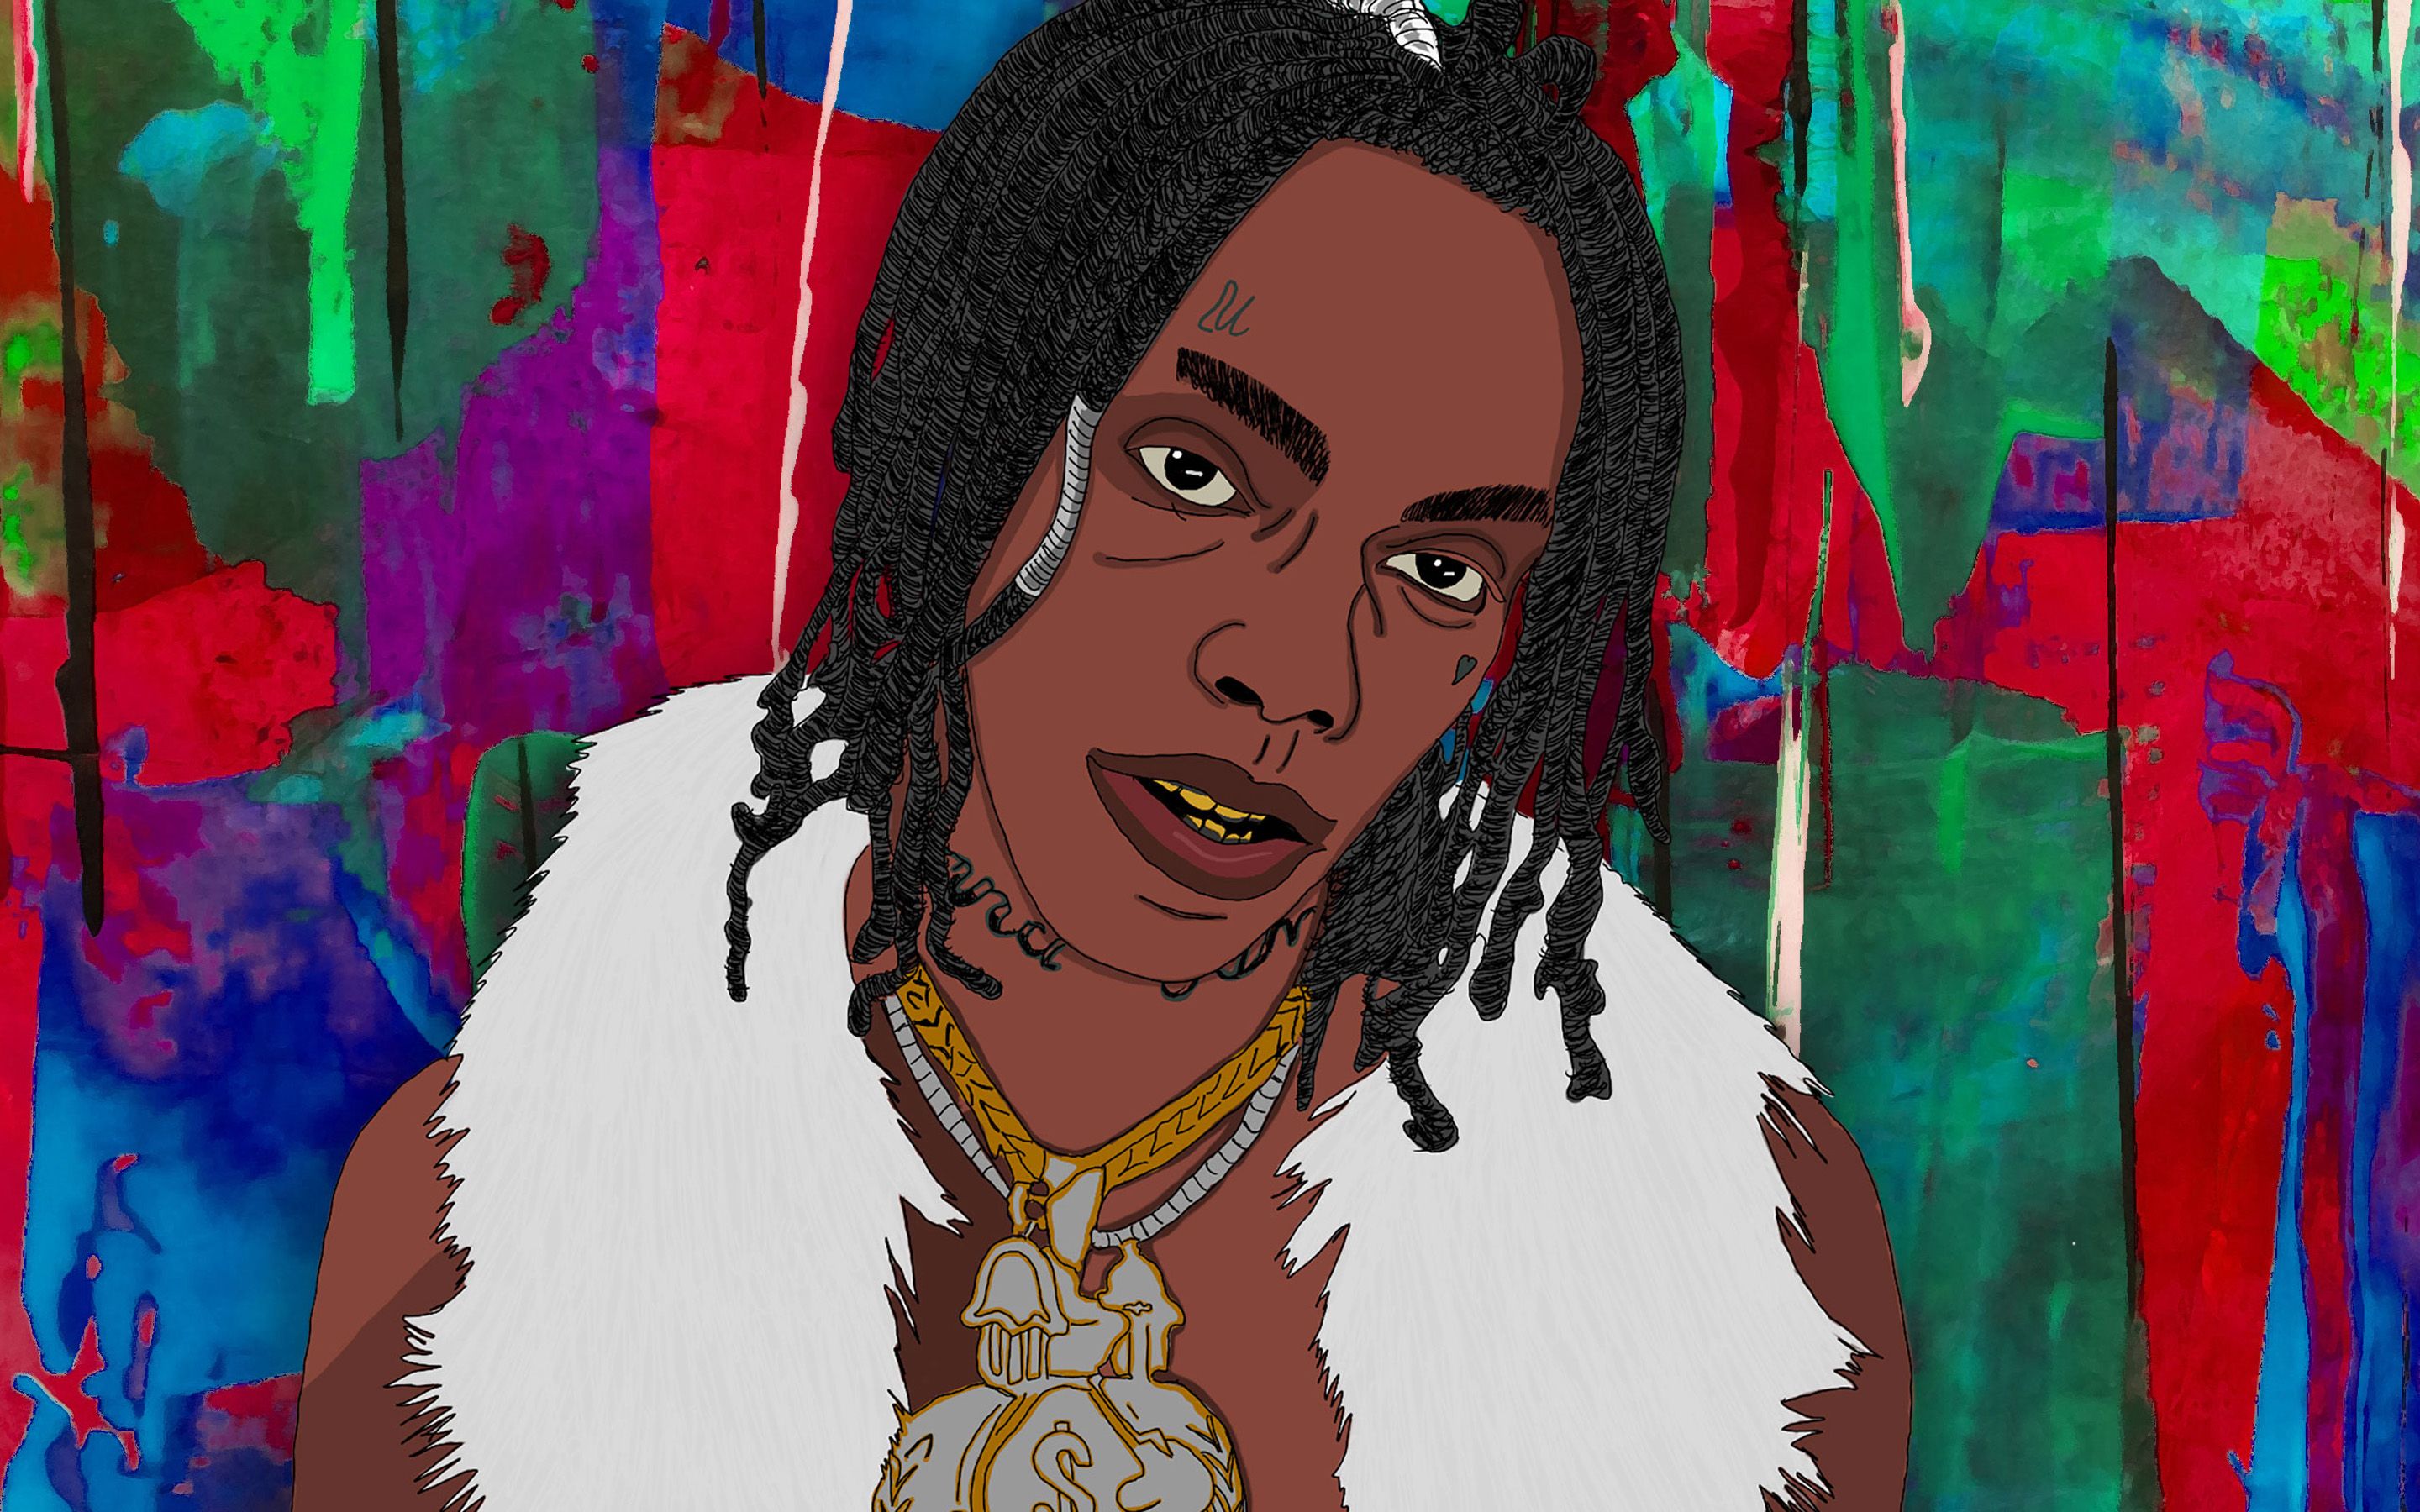 Download wallpaper YNW Melly, american rapper, creative, music stars, Jamell Maurice Demons, fan art, american celebrity, YNW Melly art for desktop with resolution 2880x1800. High Quality HD picture wallpaper